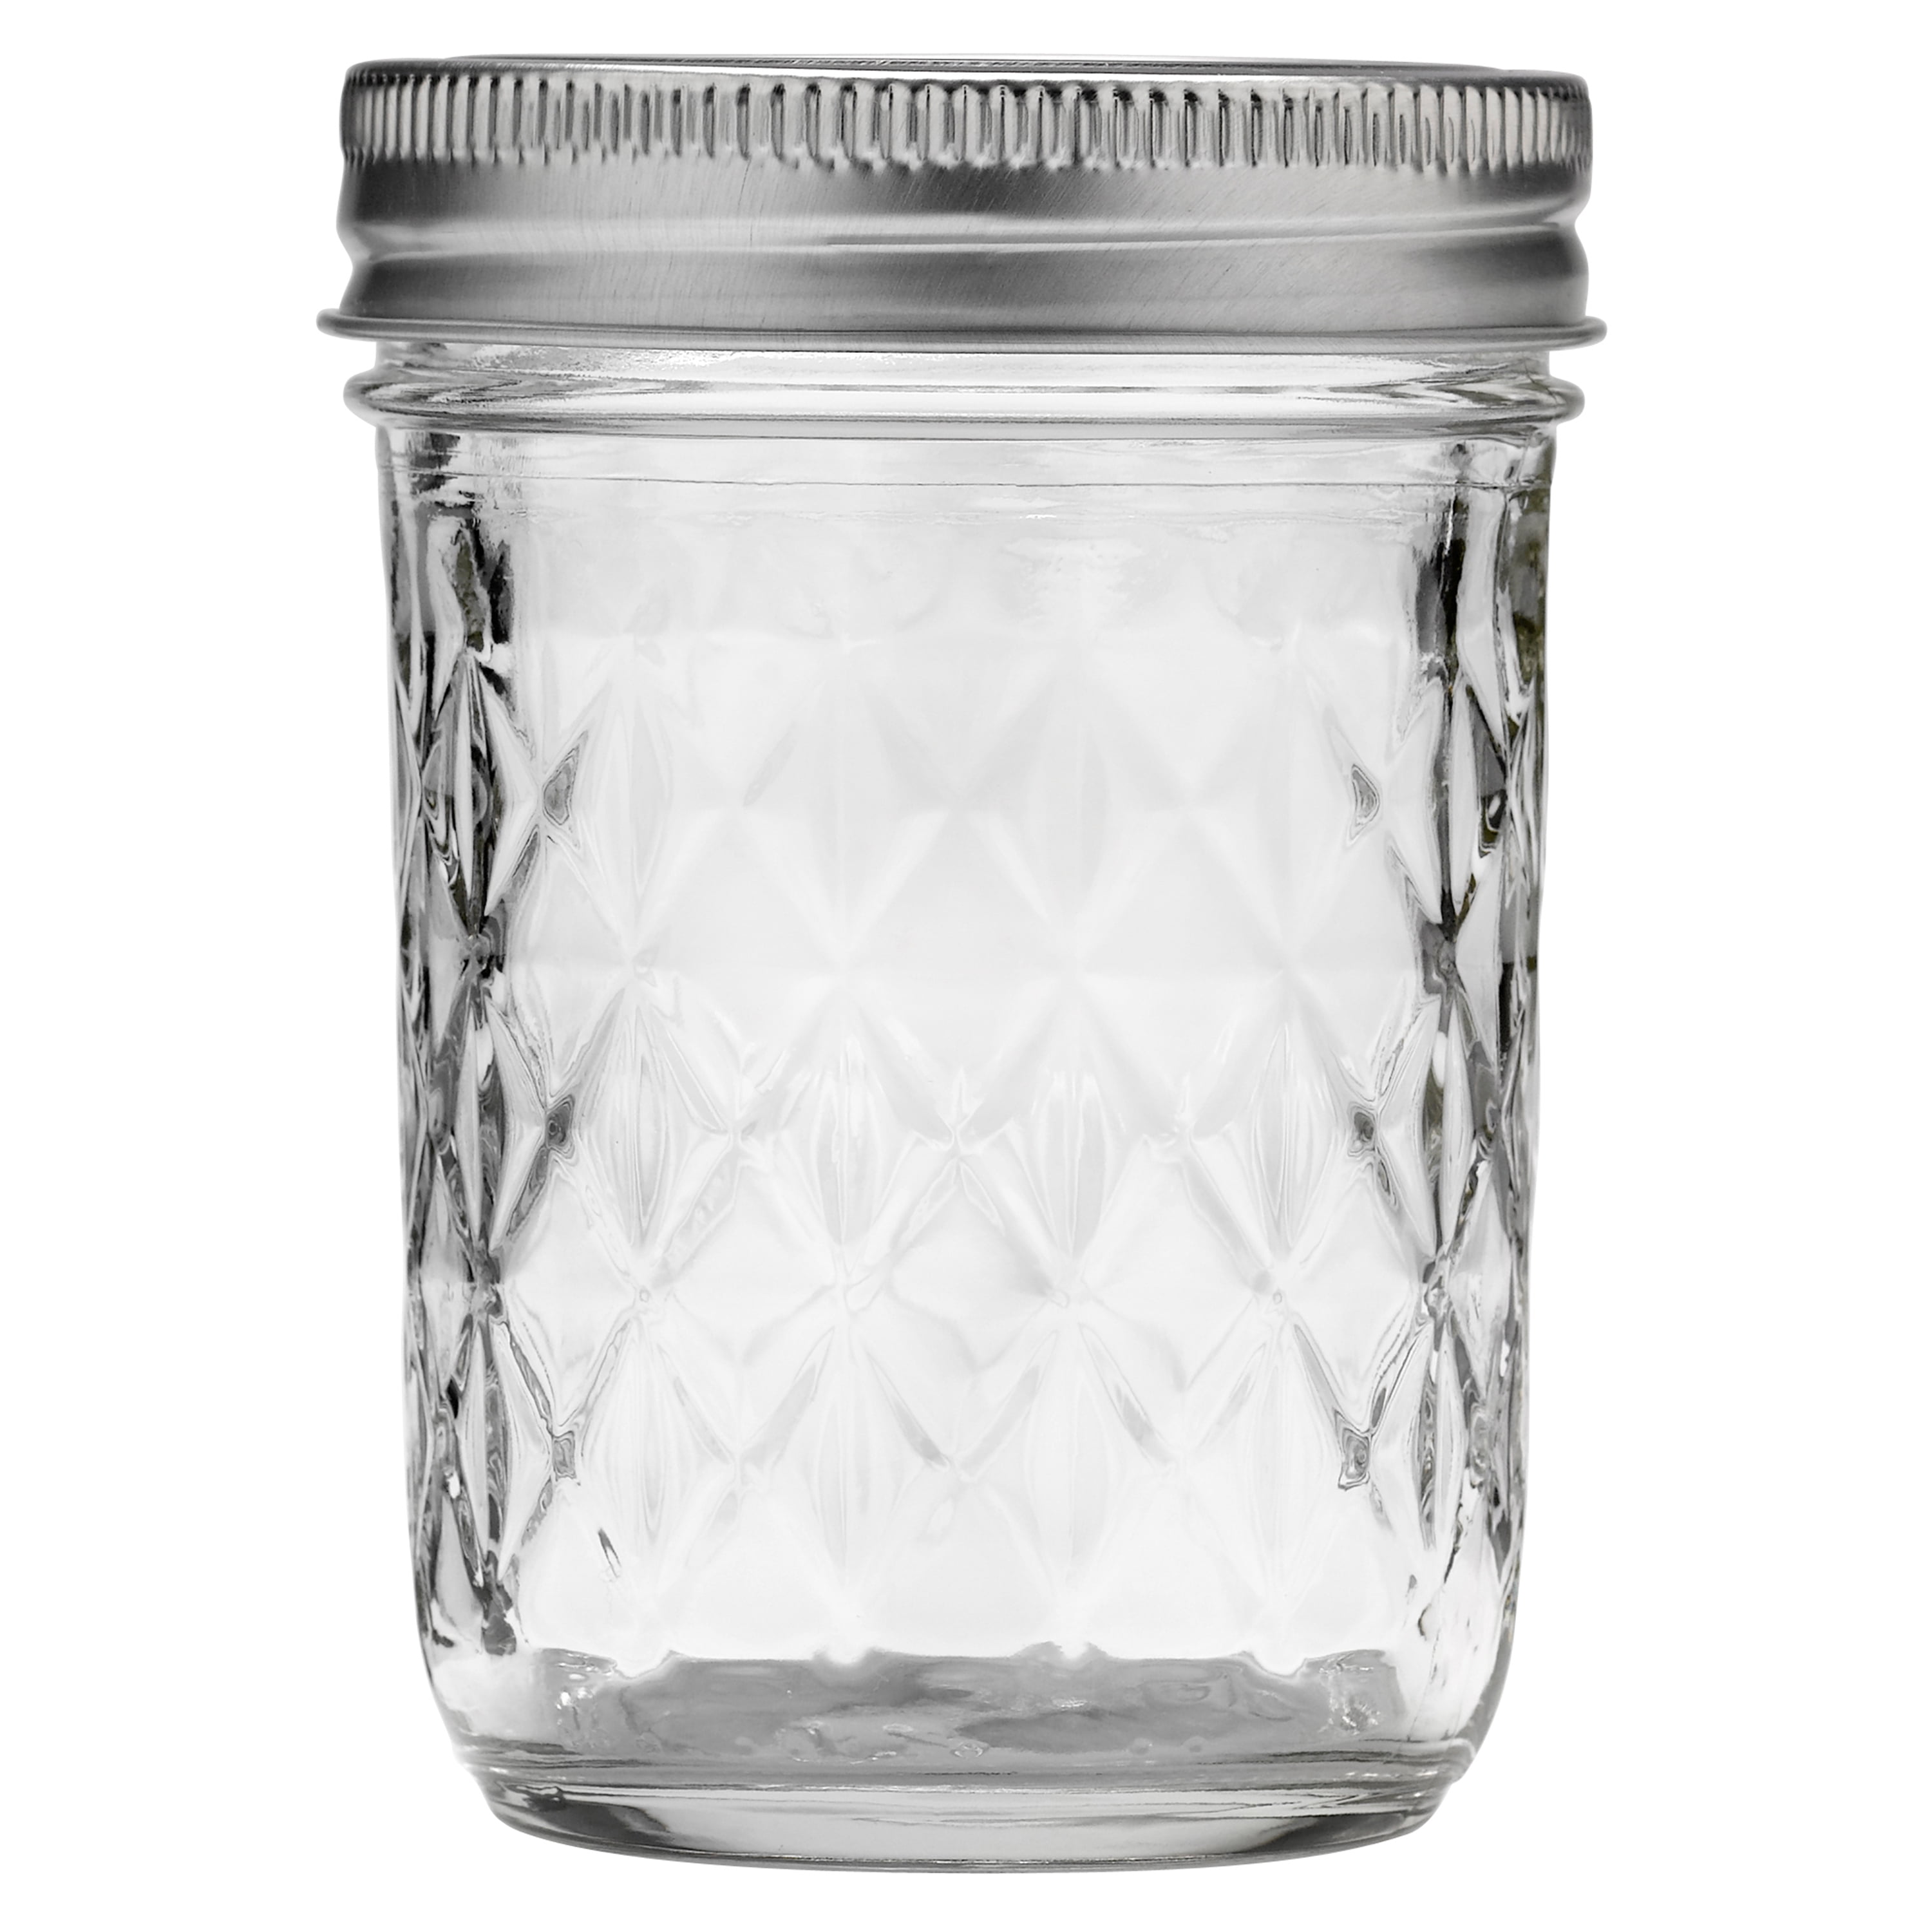 12 Pack Mason Jars 8 oz with Airtight Lids, Glass Regular Mouth Canning  Jars, Small Quilted Crystal Jars for Jelly, Jam, Overnight Oats, Meal Prep